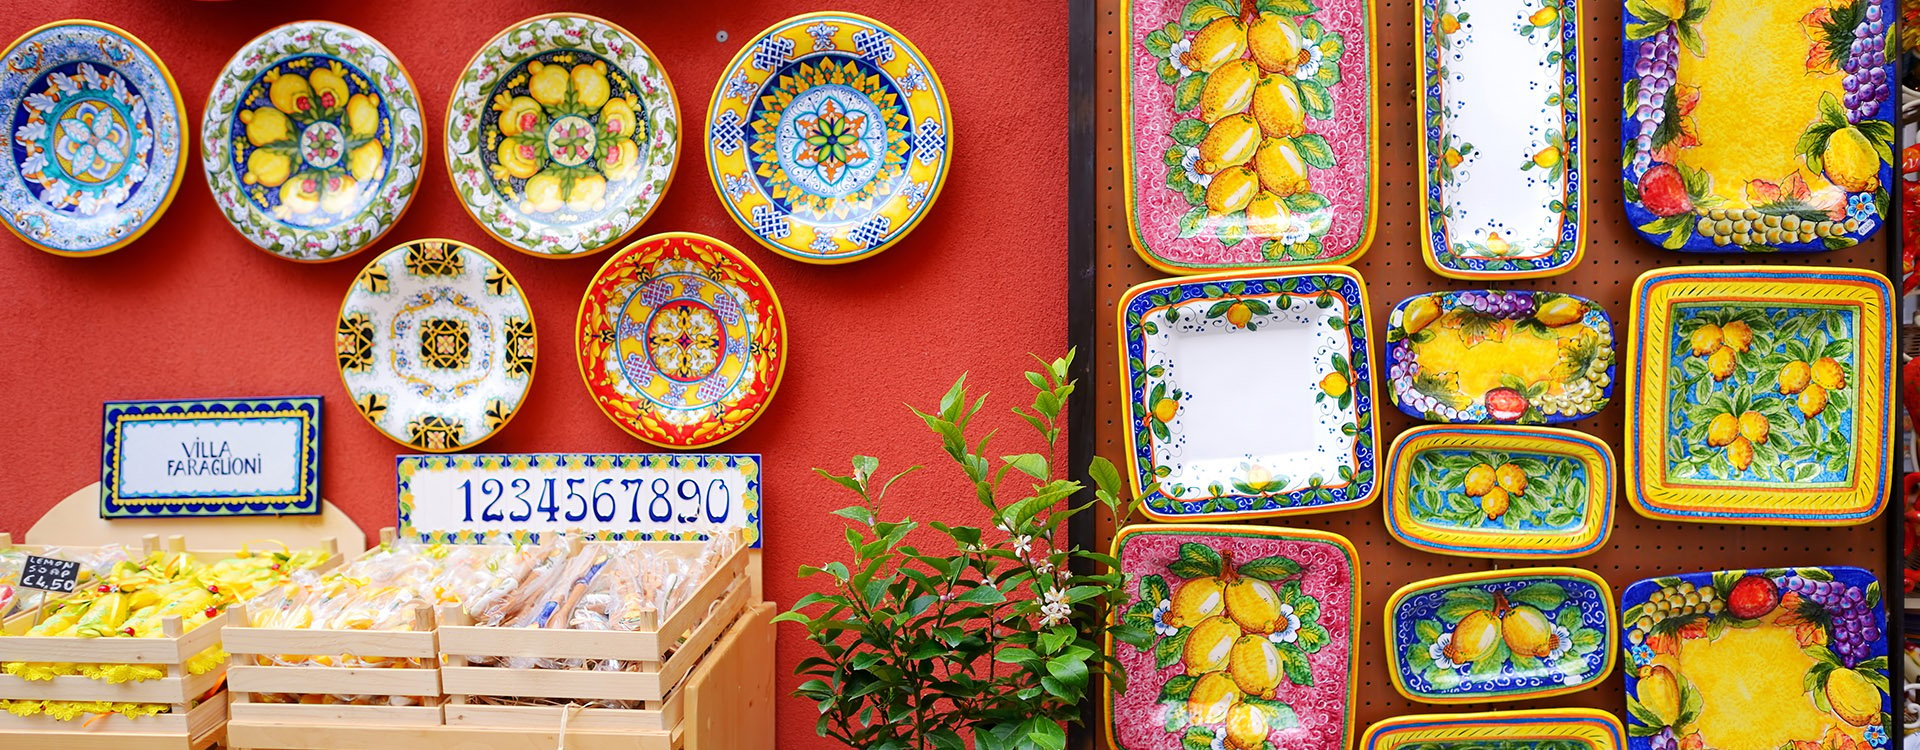 ypical ceramics sold in beautiful town of Positano, Italy